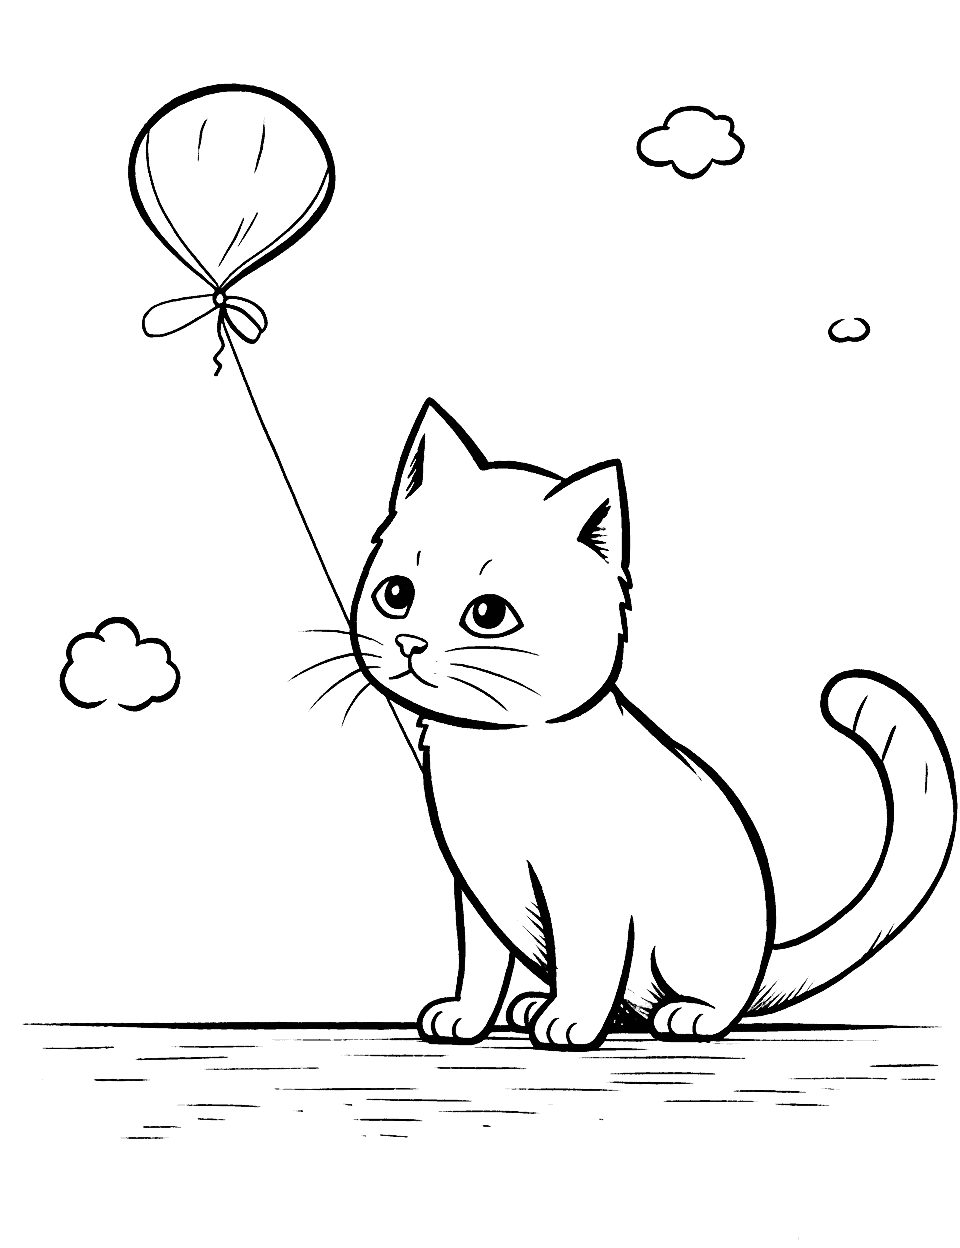 Easy Cat and a Kite Coloring Page - A simple coloring page of a cat watching a kite flying in the sky.